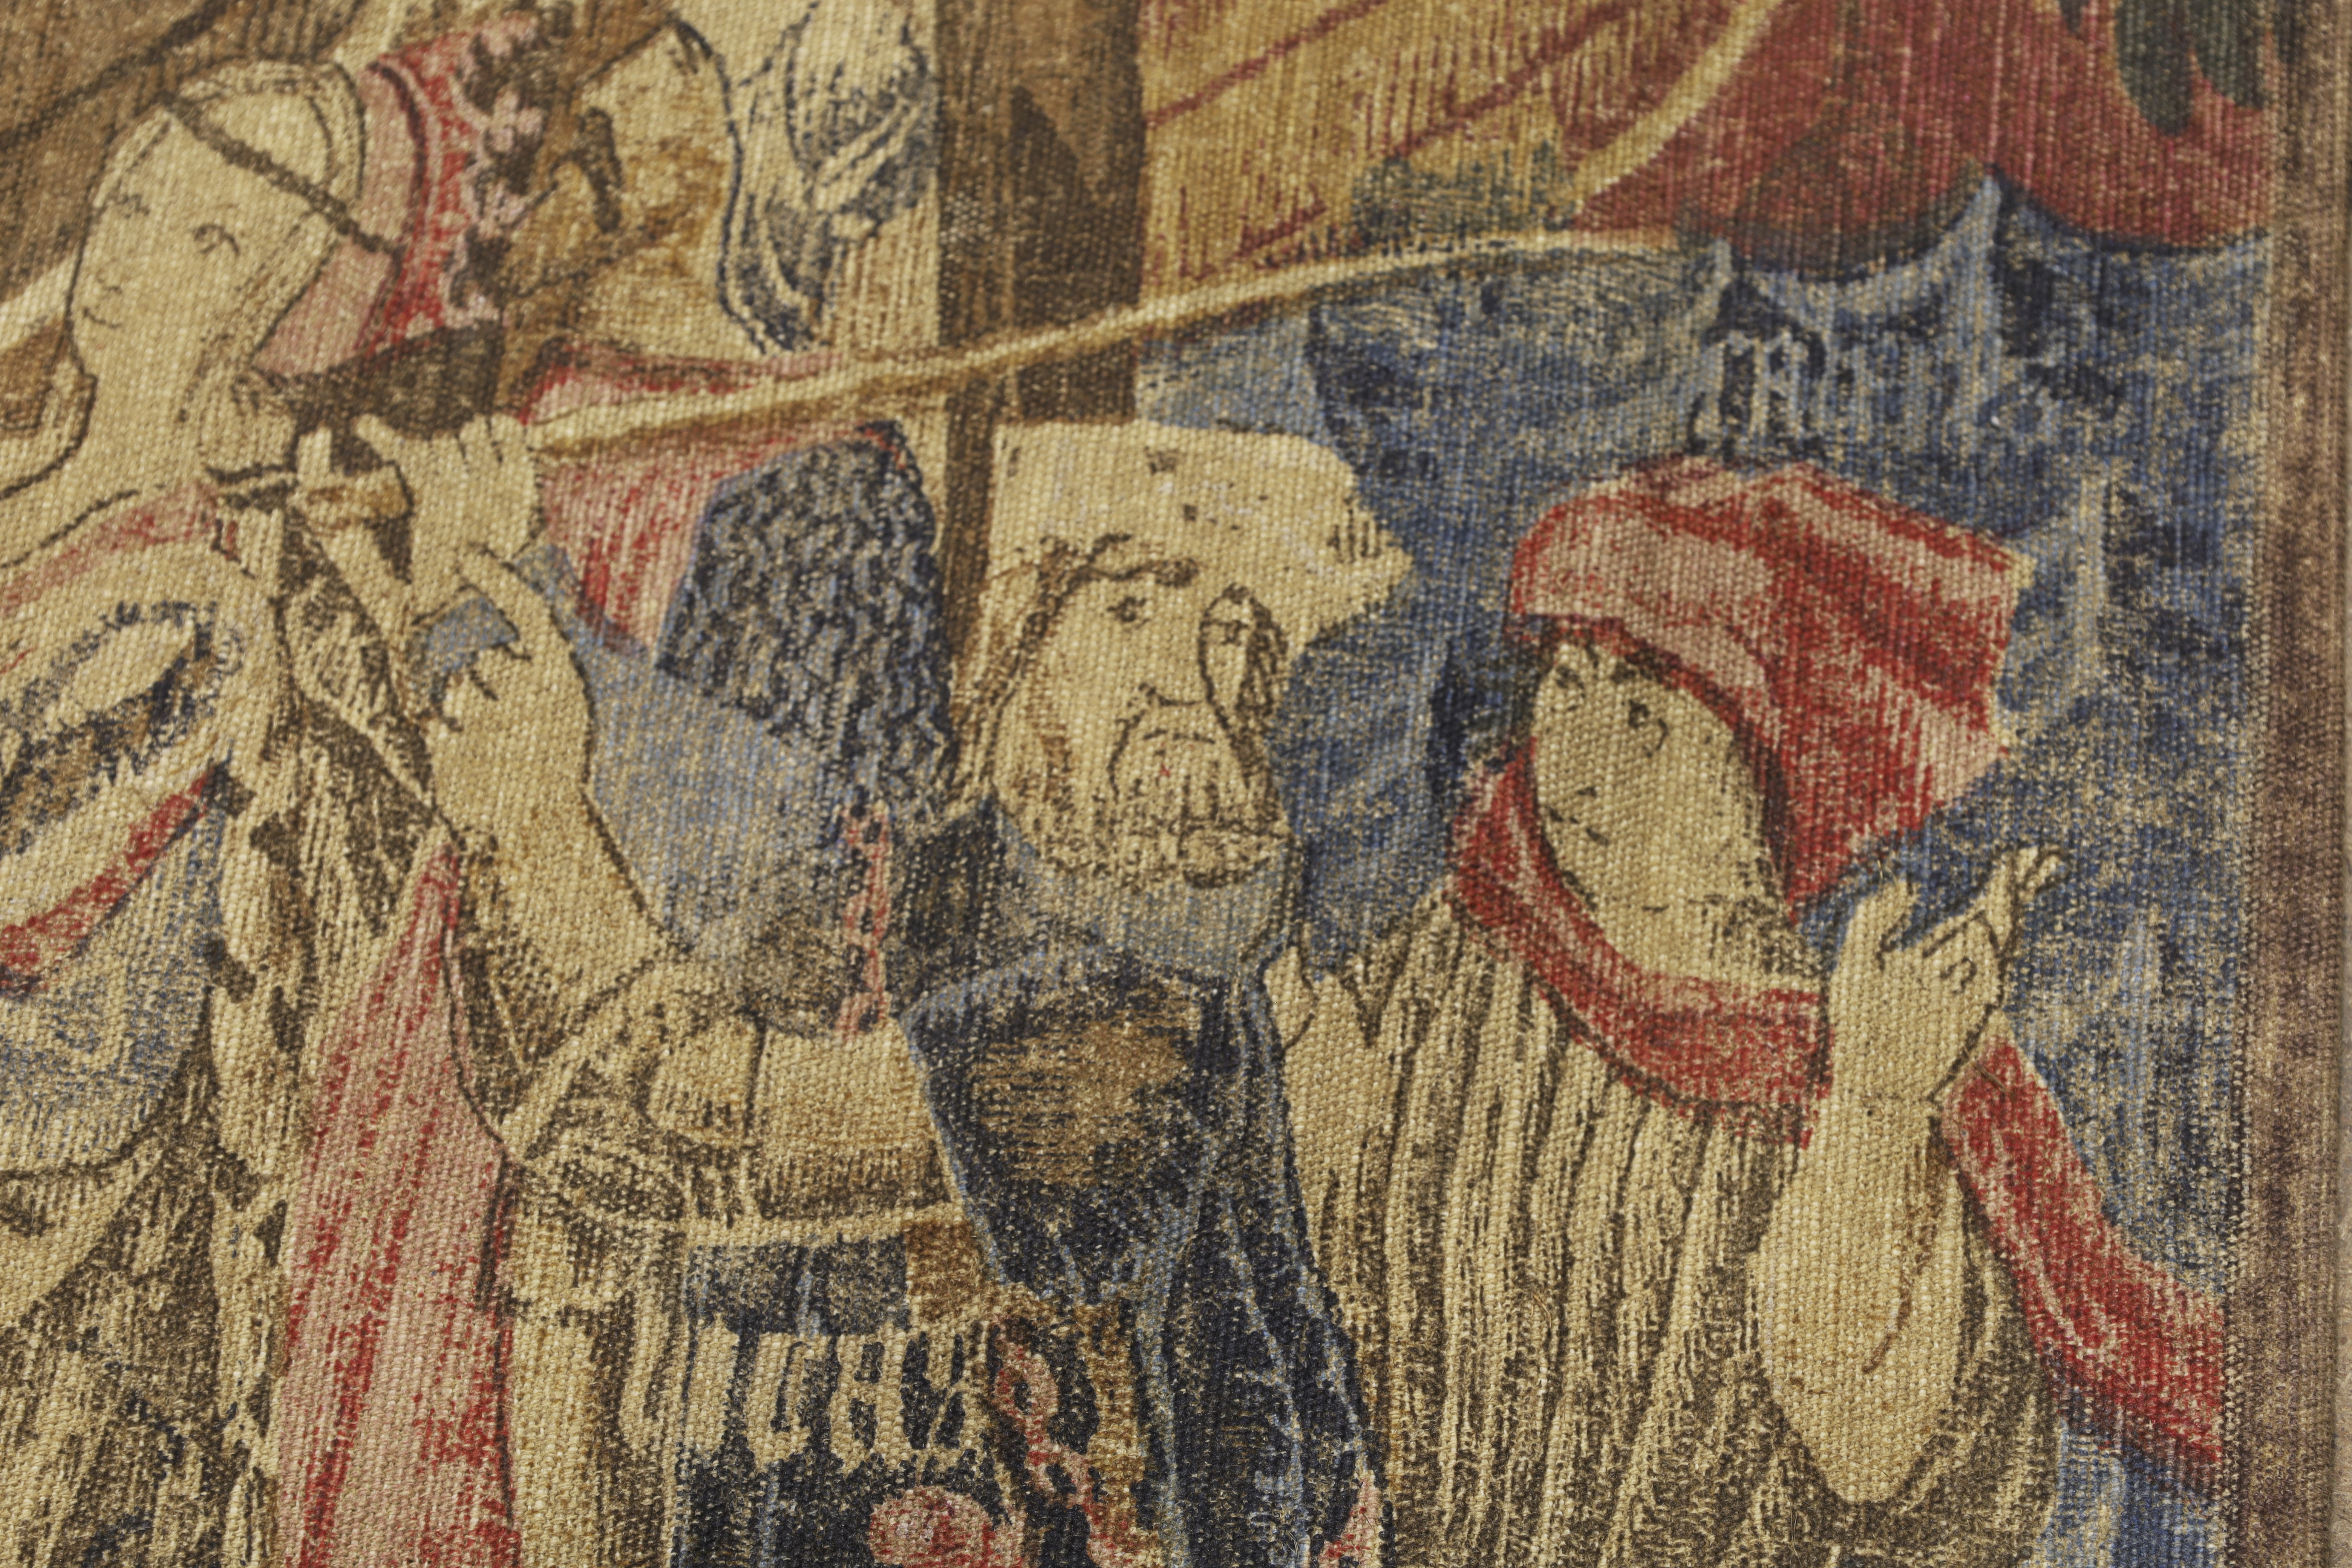 A modern printed tapestry replica of the 16th Netherlandish tapestry 'Battle and Embarkation',  D... - Image 2 of 4